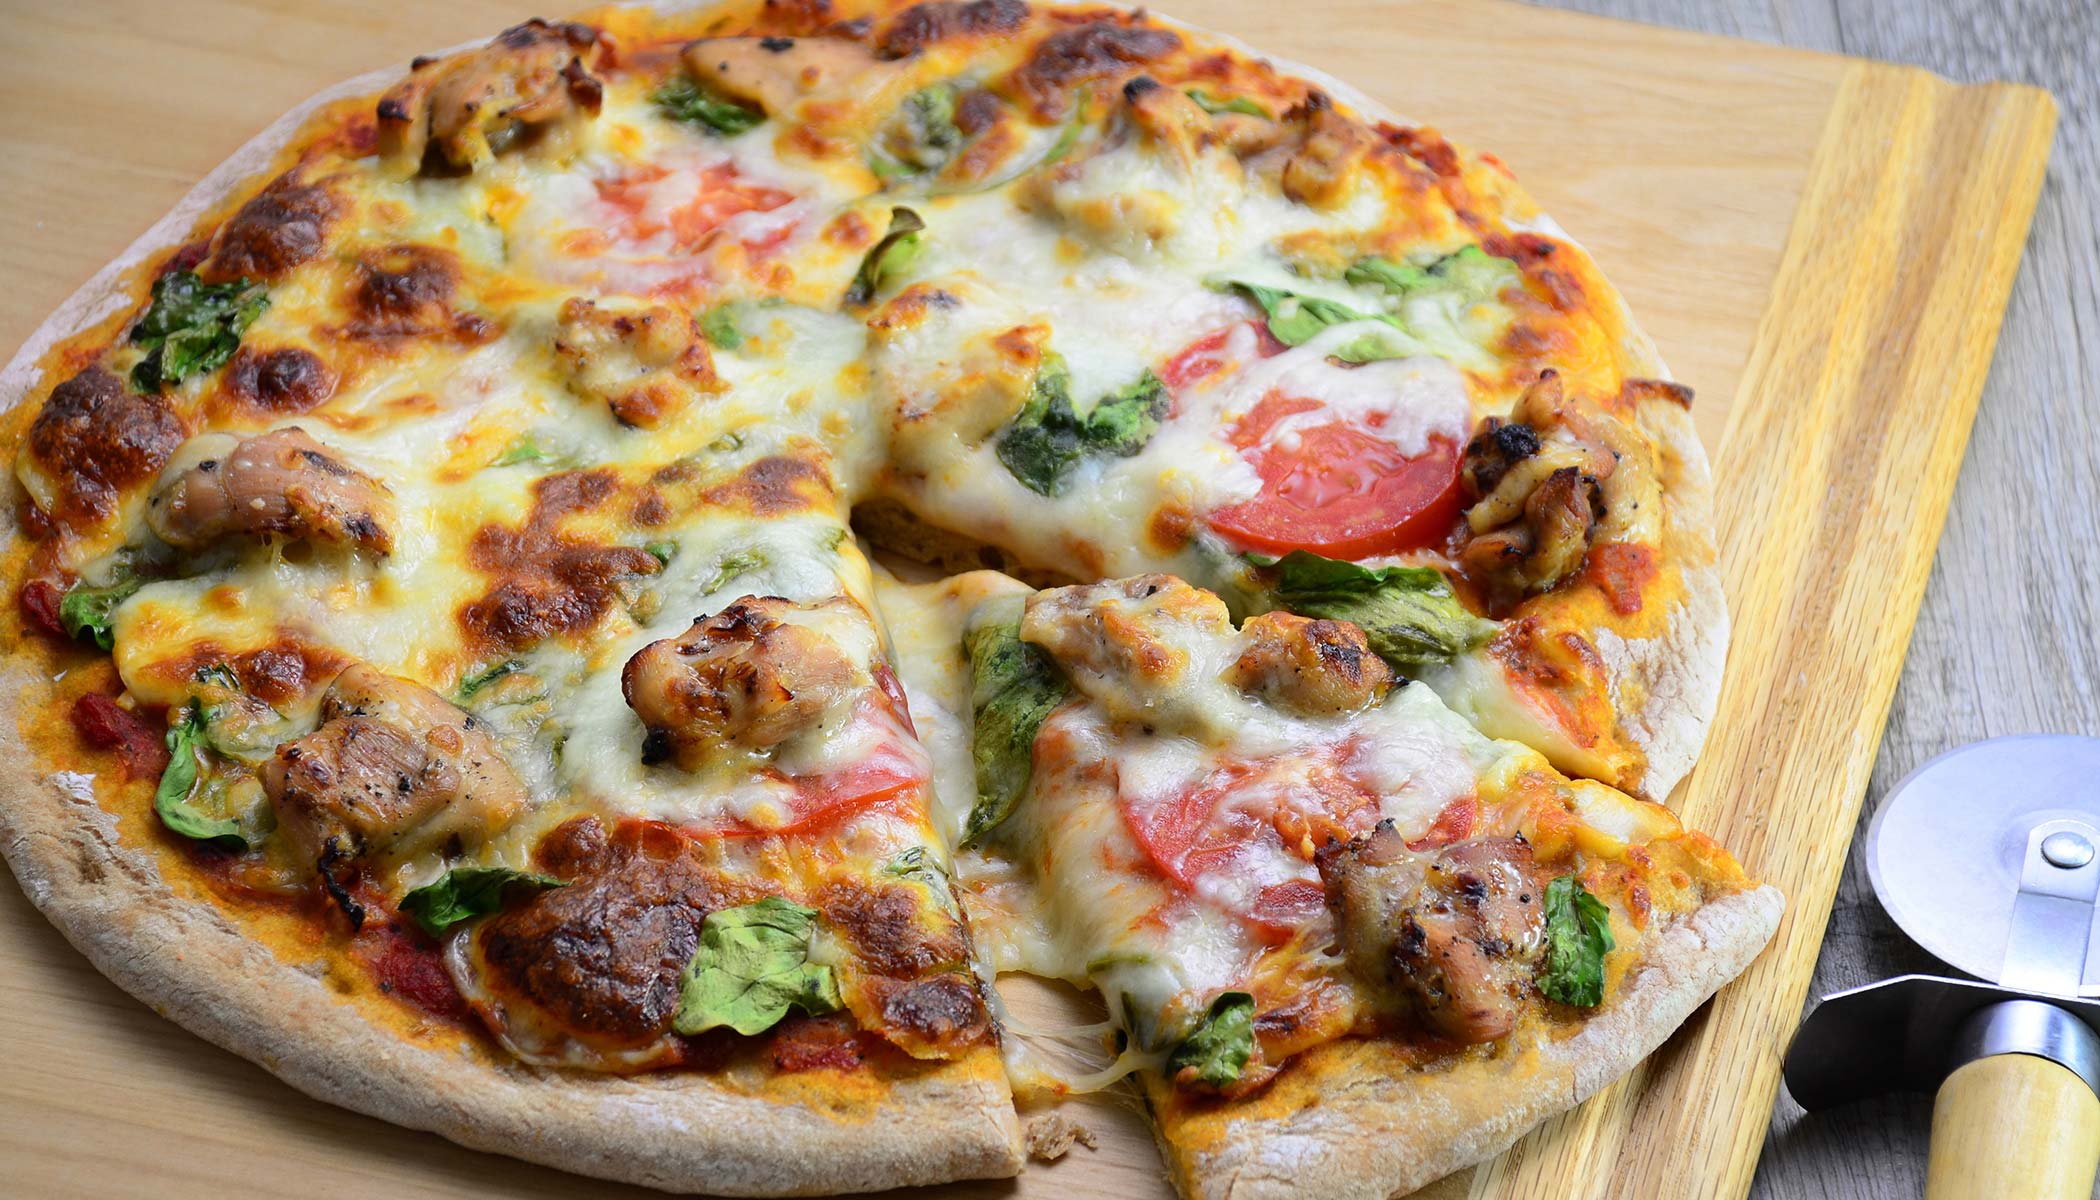 Zojirushi Recipe – Whole Wheat Chicken Pizza with Spinach and Fresh Tomatoes